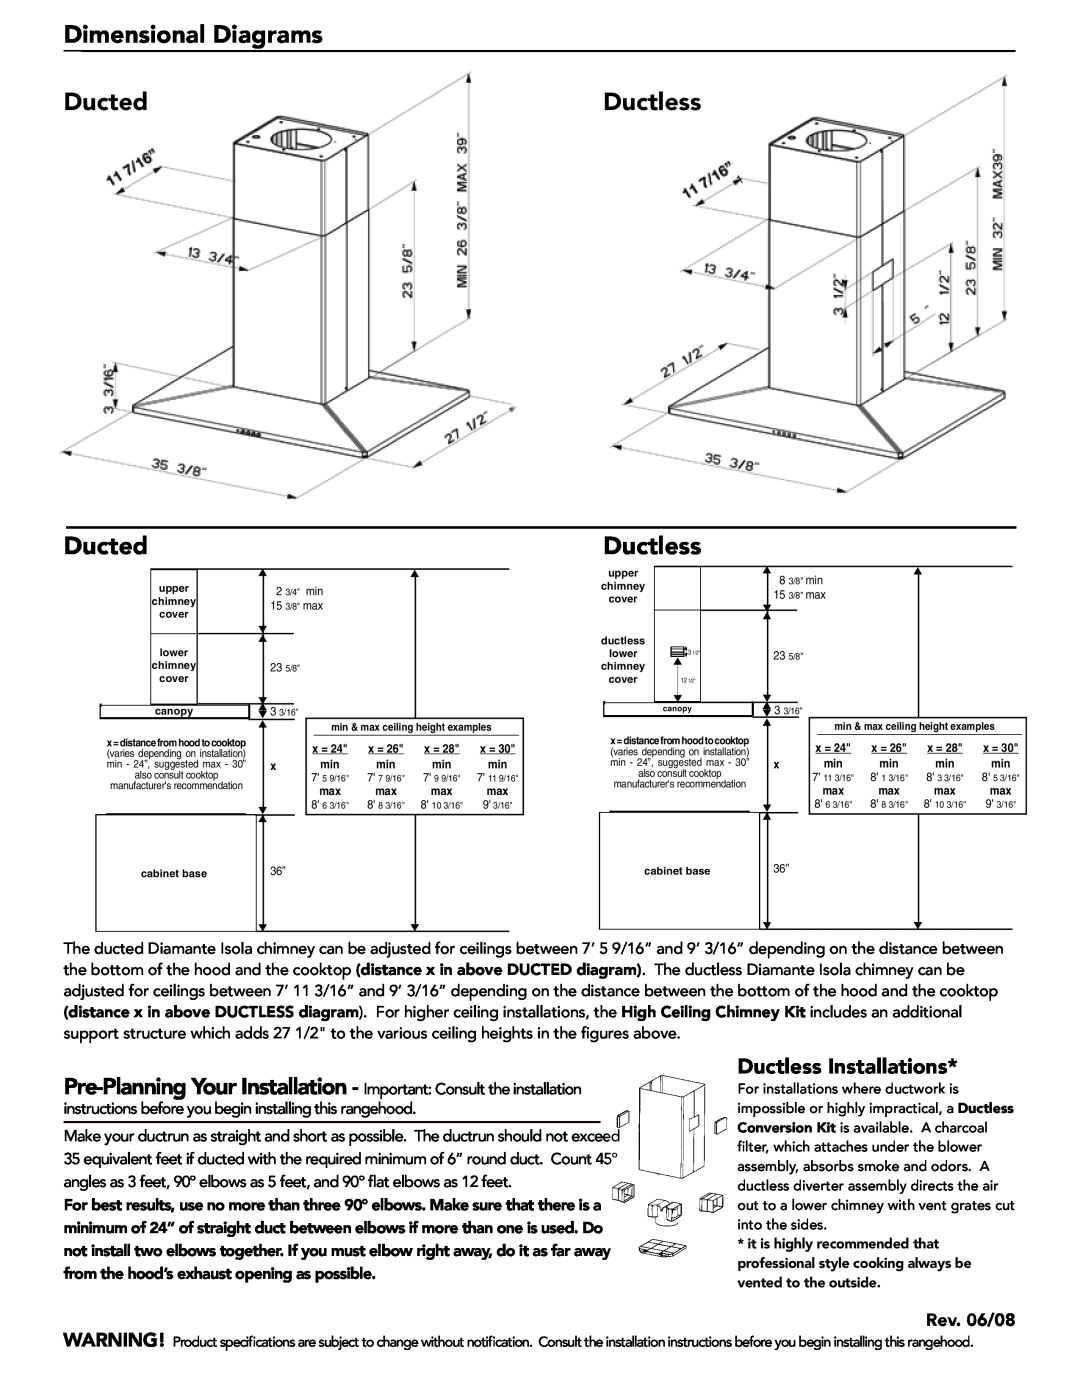 Faber 630001429 manual Dimensional Diagrams, Ducted, Ductless Installations, Rev. 06/08 